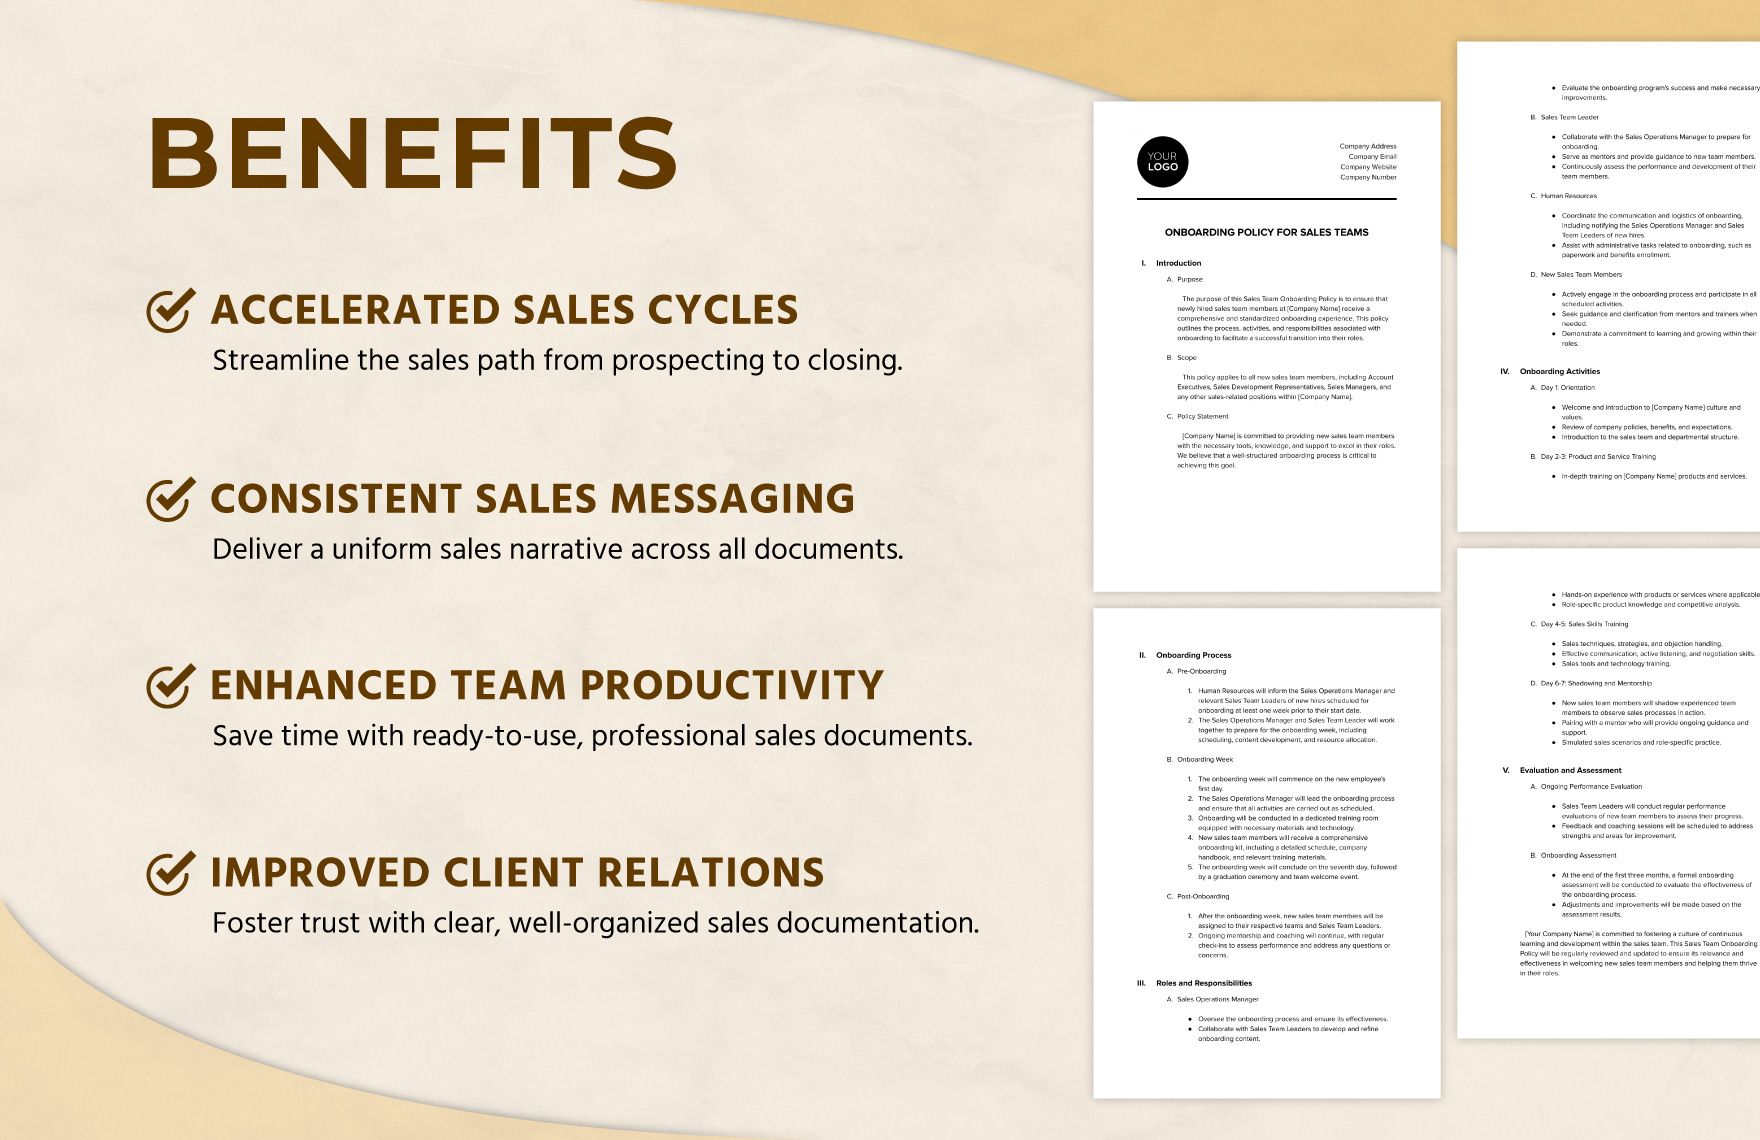 Onboarding Policy for Sales Teams Template